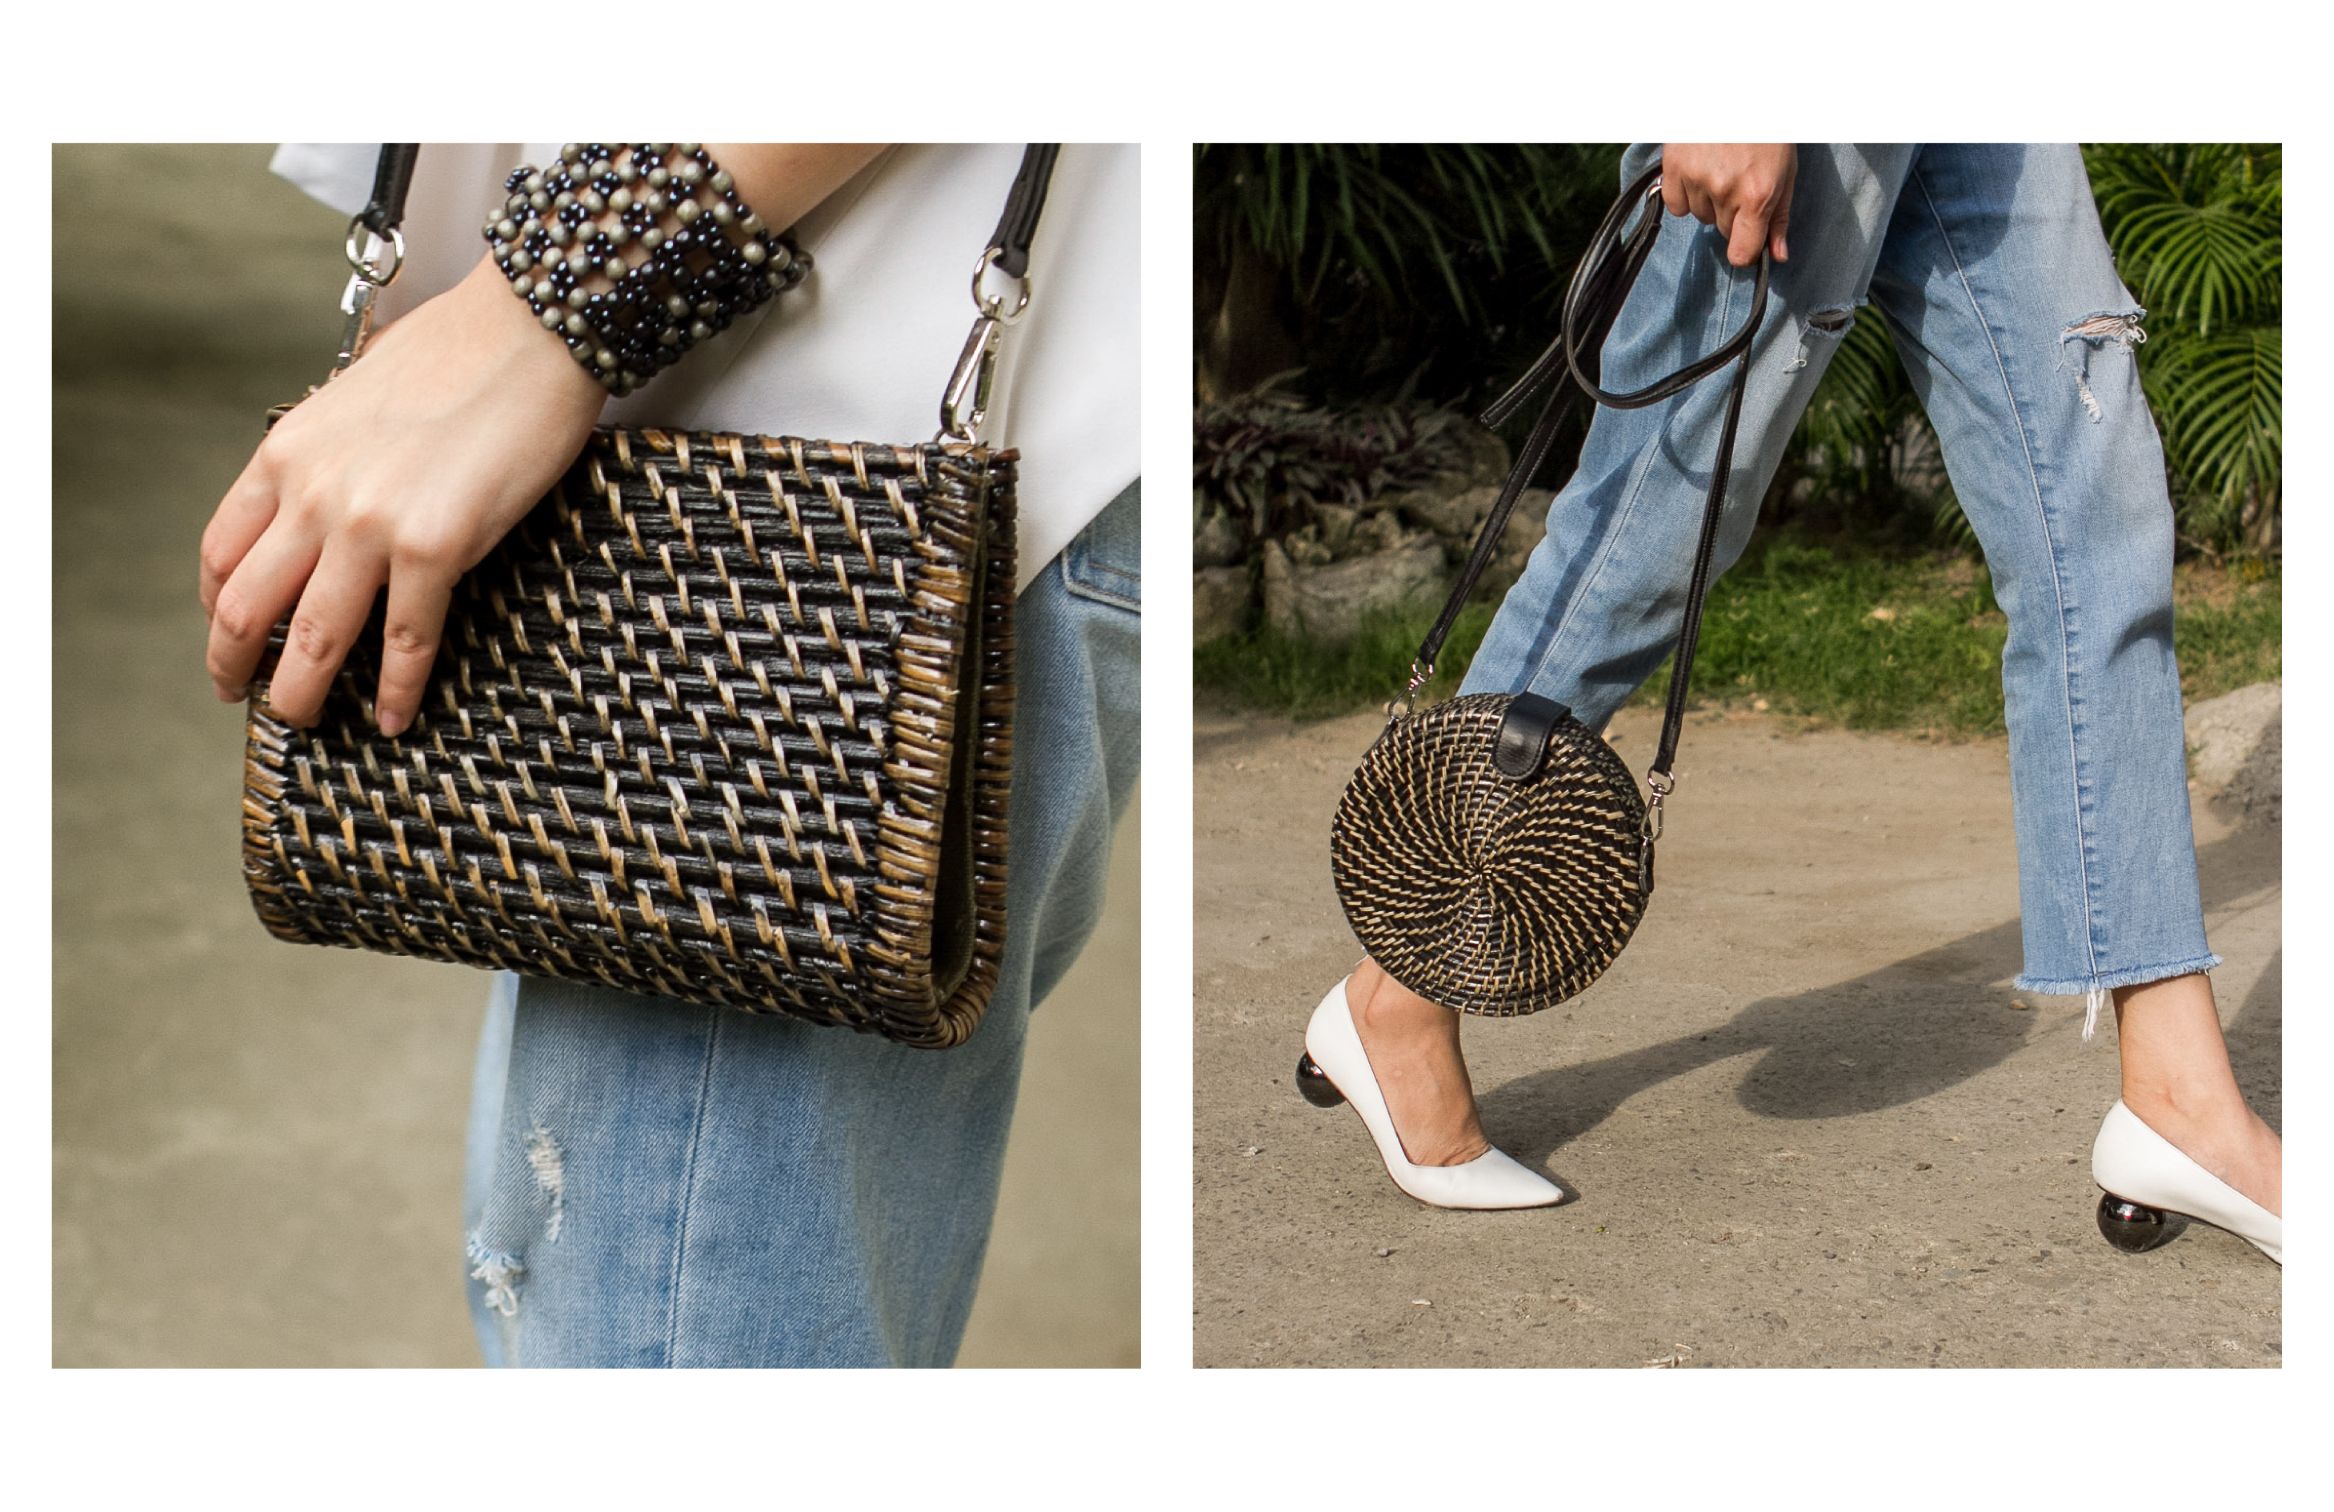 Images of a woman wearing the hand bag